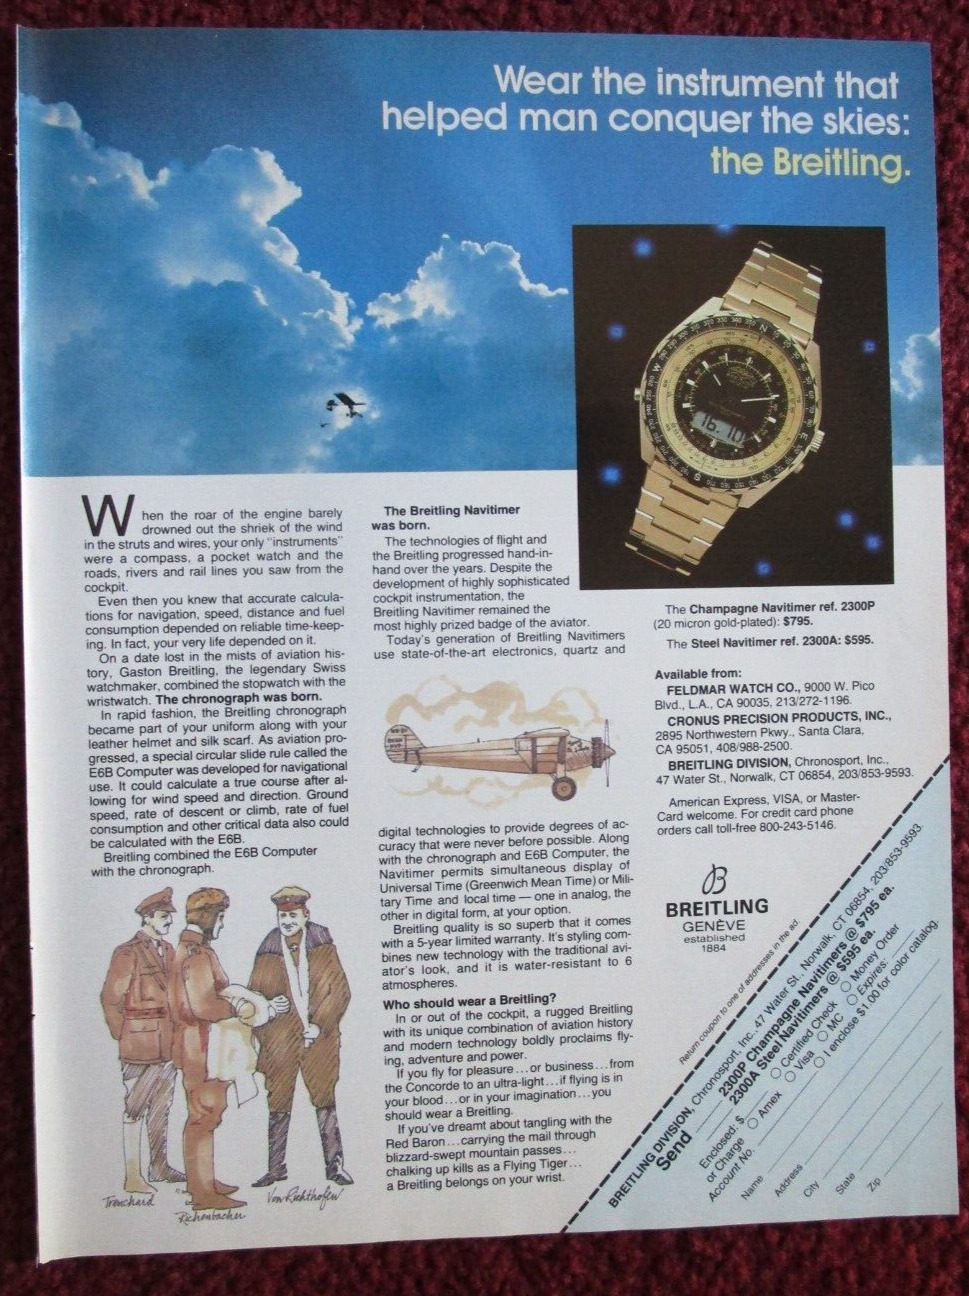 1983 BREITLING Navitimer WATCH Print Ad ~ Helped Man Conquer the Skies, Pilots